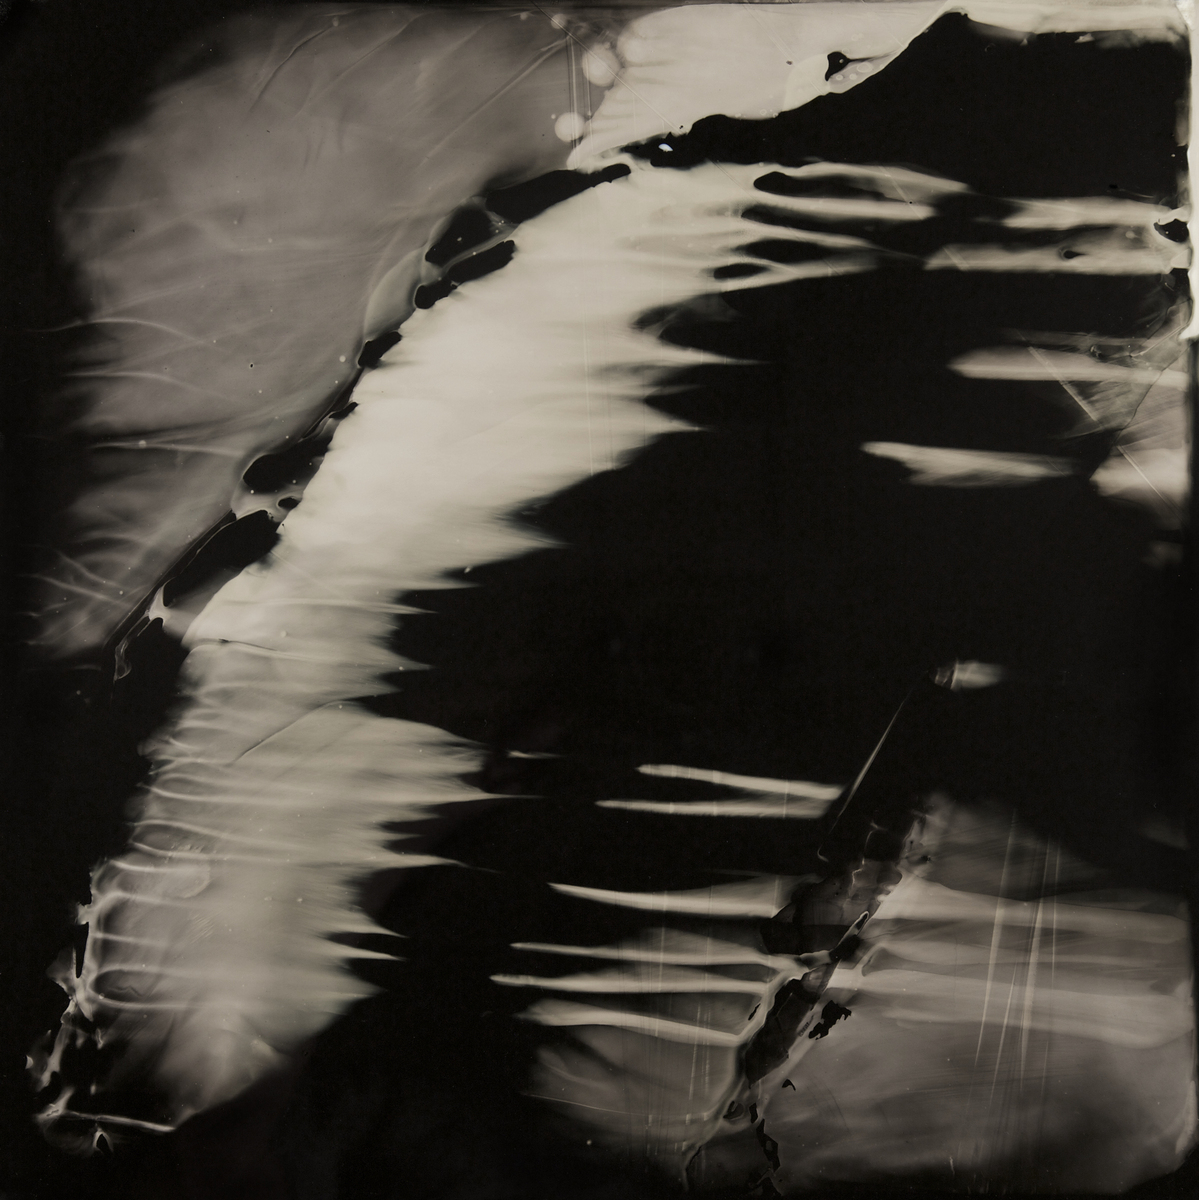 8:52 PM, April 8, 2015. Collodion tintype, 14x14 inches.